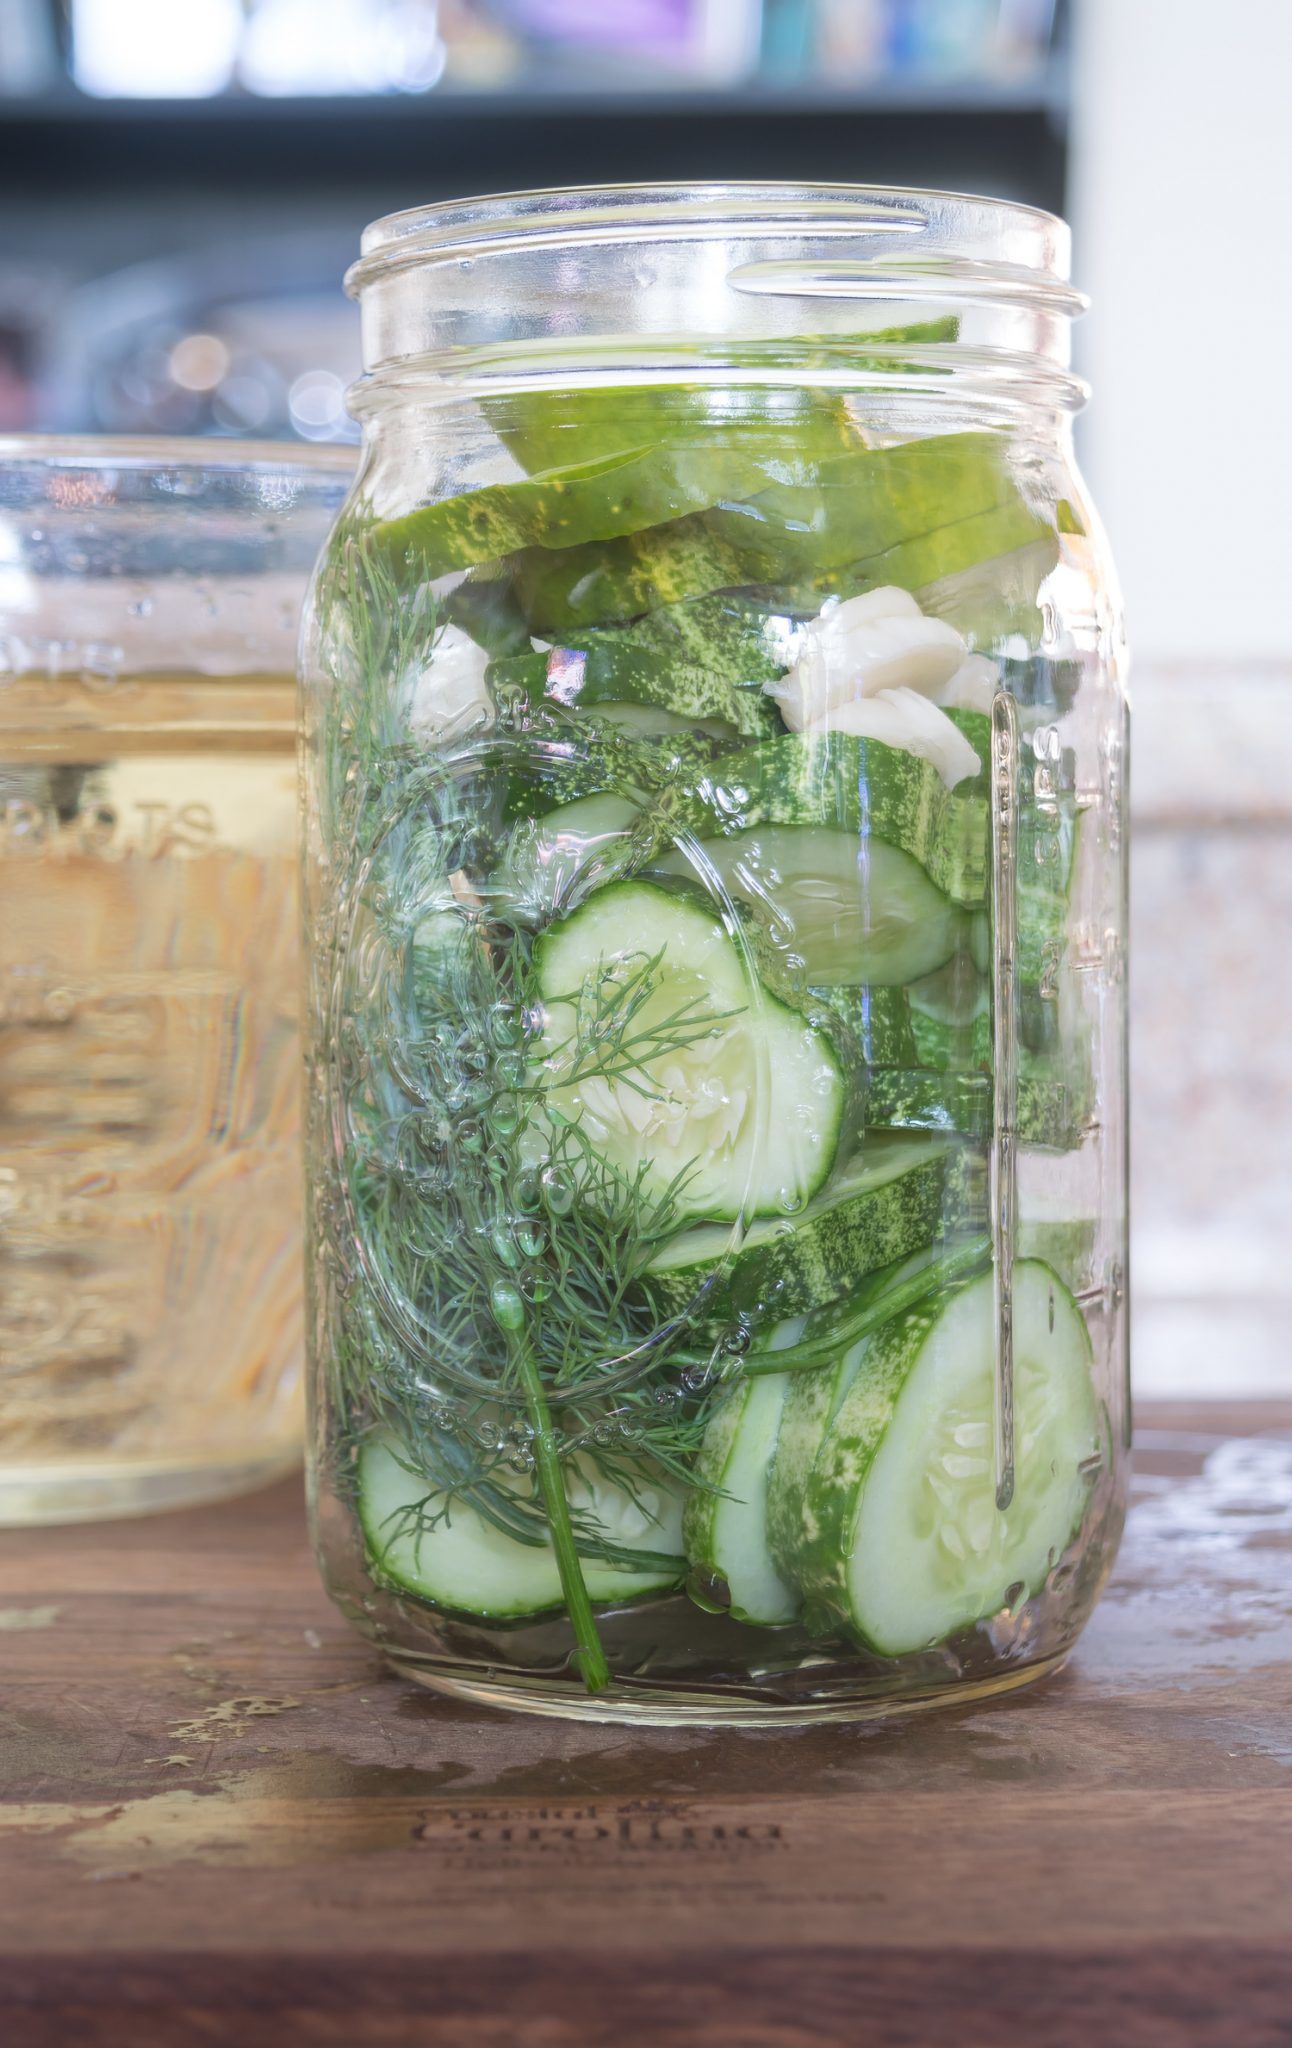 Refrigerator Dill Pickle Recipe: sliced cucumbers and dill in jar ready for pickle brine